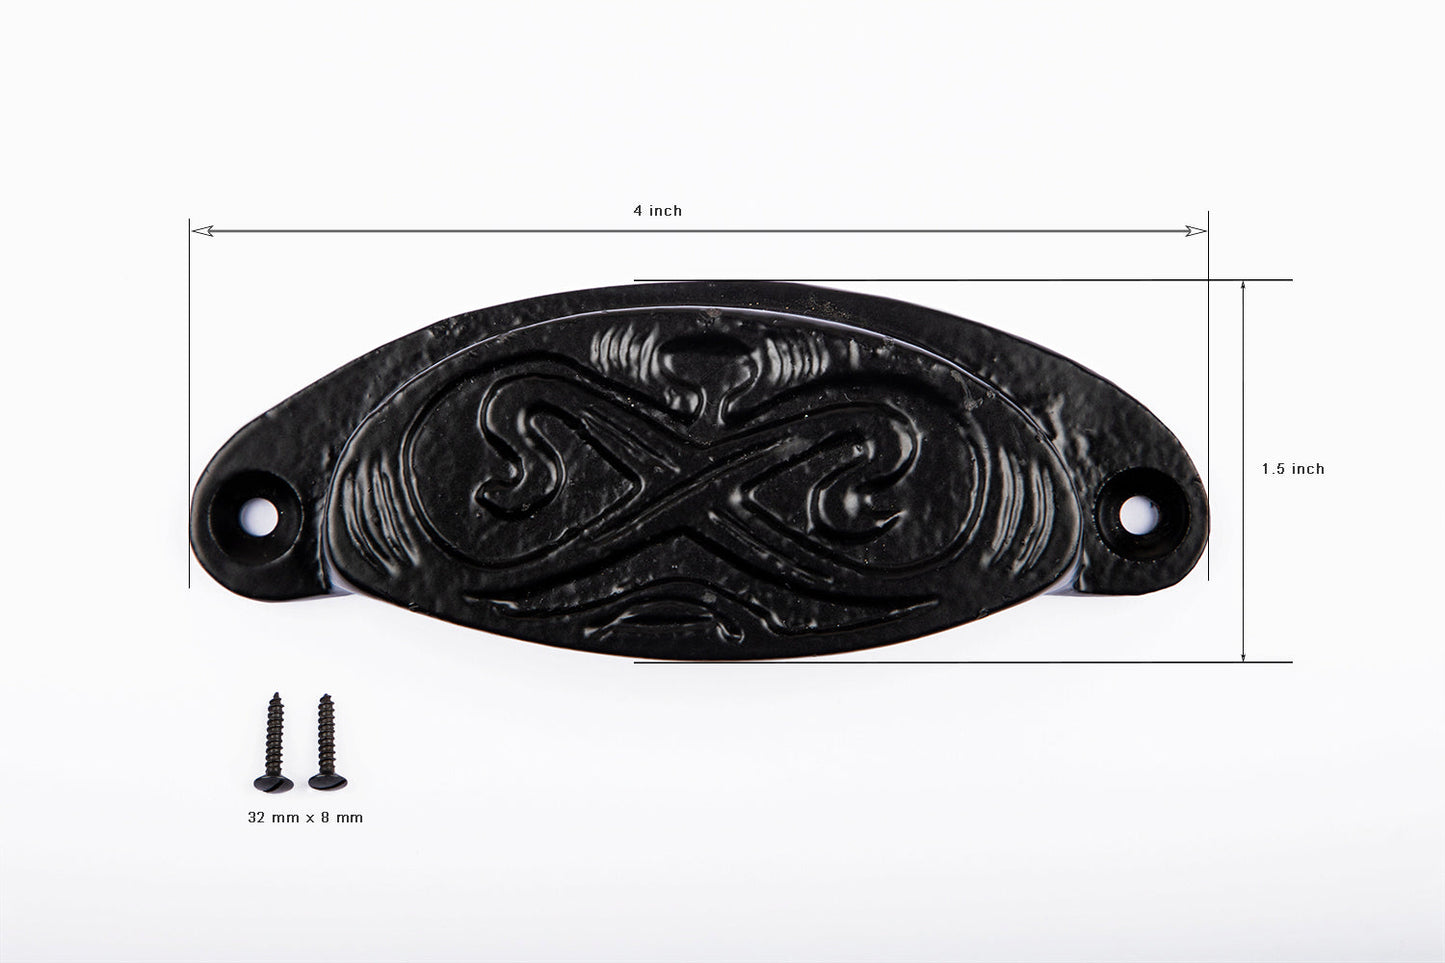 Cast Iron OVAL Drawer Cup Pull Handle Antique Black